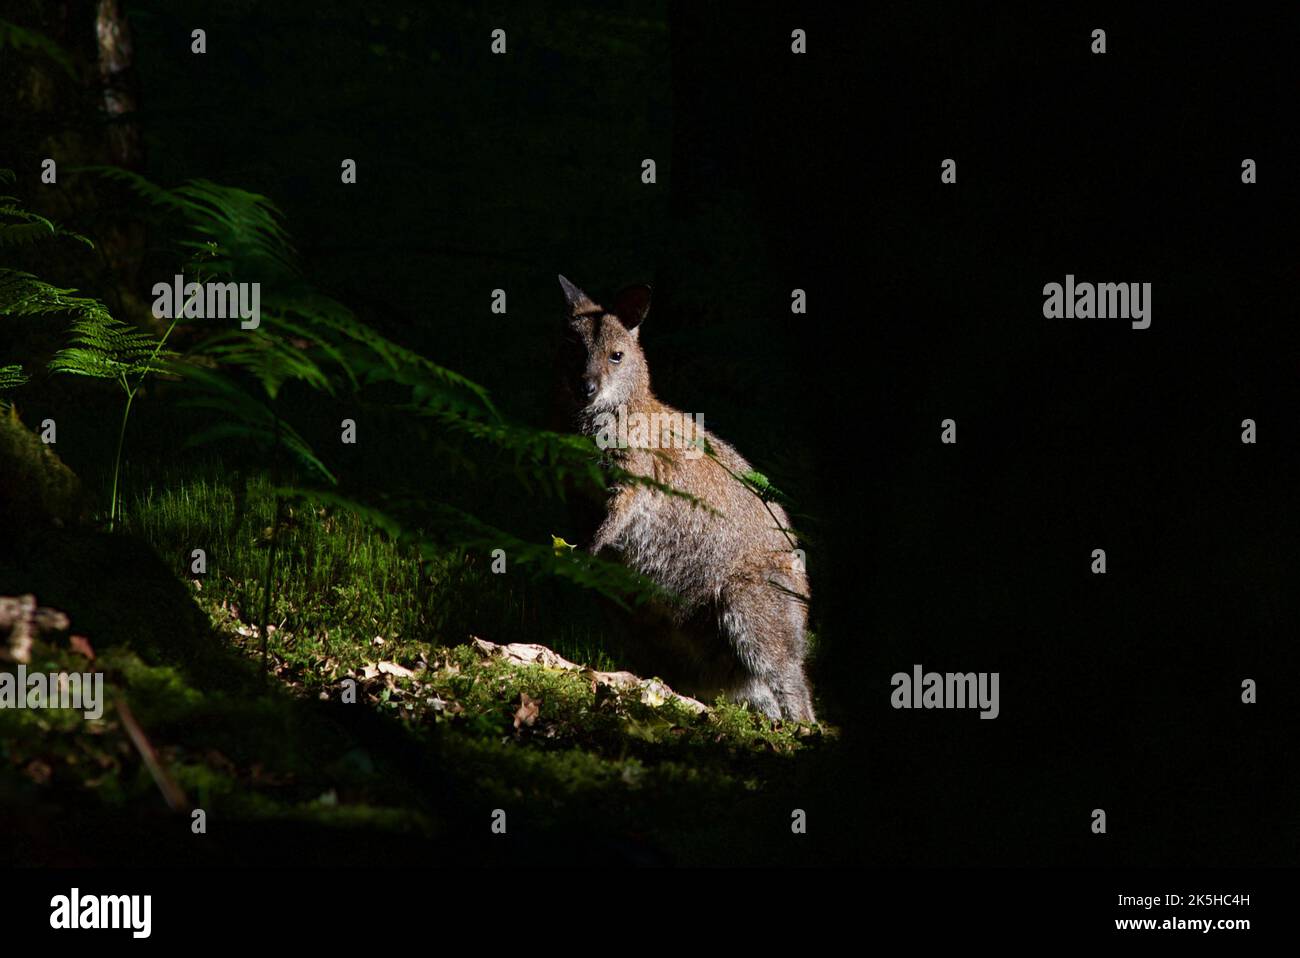 Red-necked wallaby on Inchconnachan Island, Loch Lomond and The Trossachs National Park, Scotland, UK. Wallabies in Scotland, Bennetts Wallaby, woods. Stock Photo